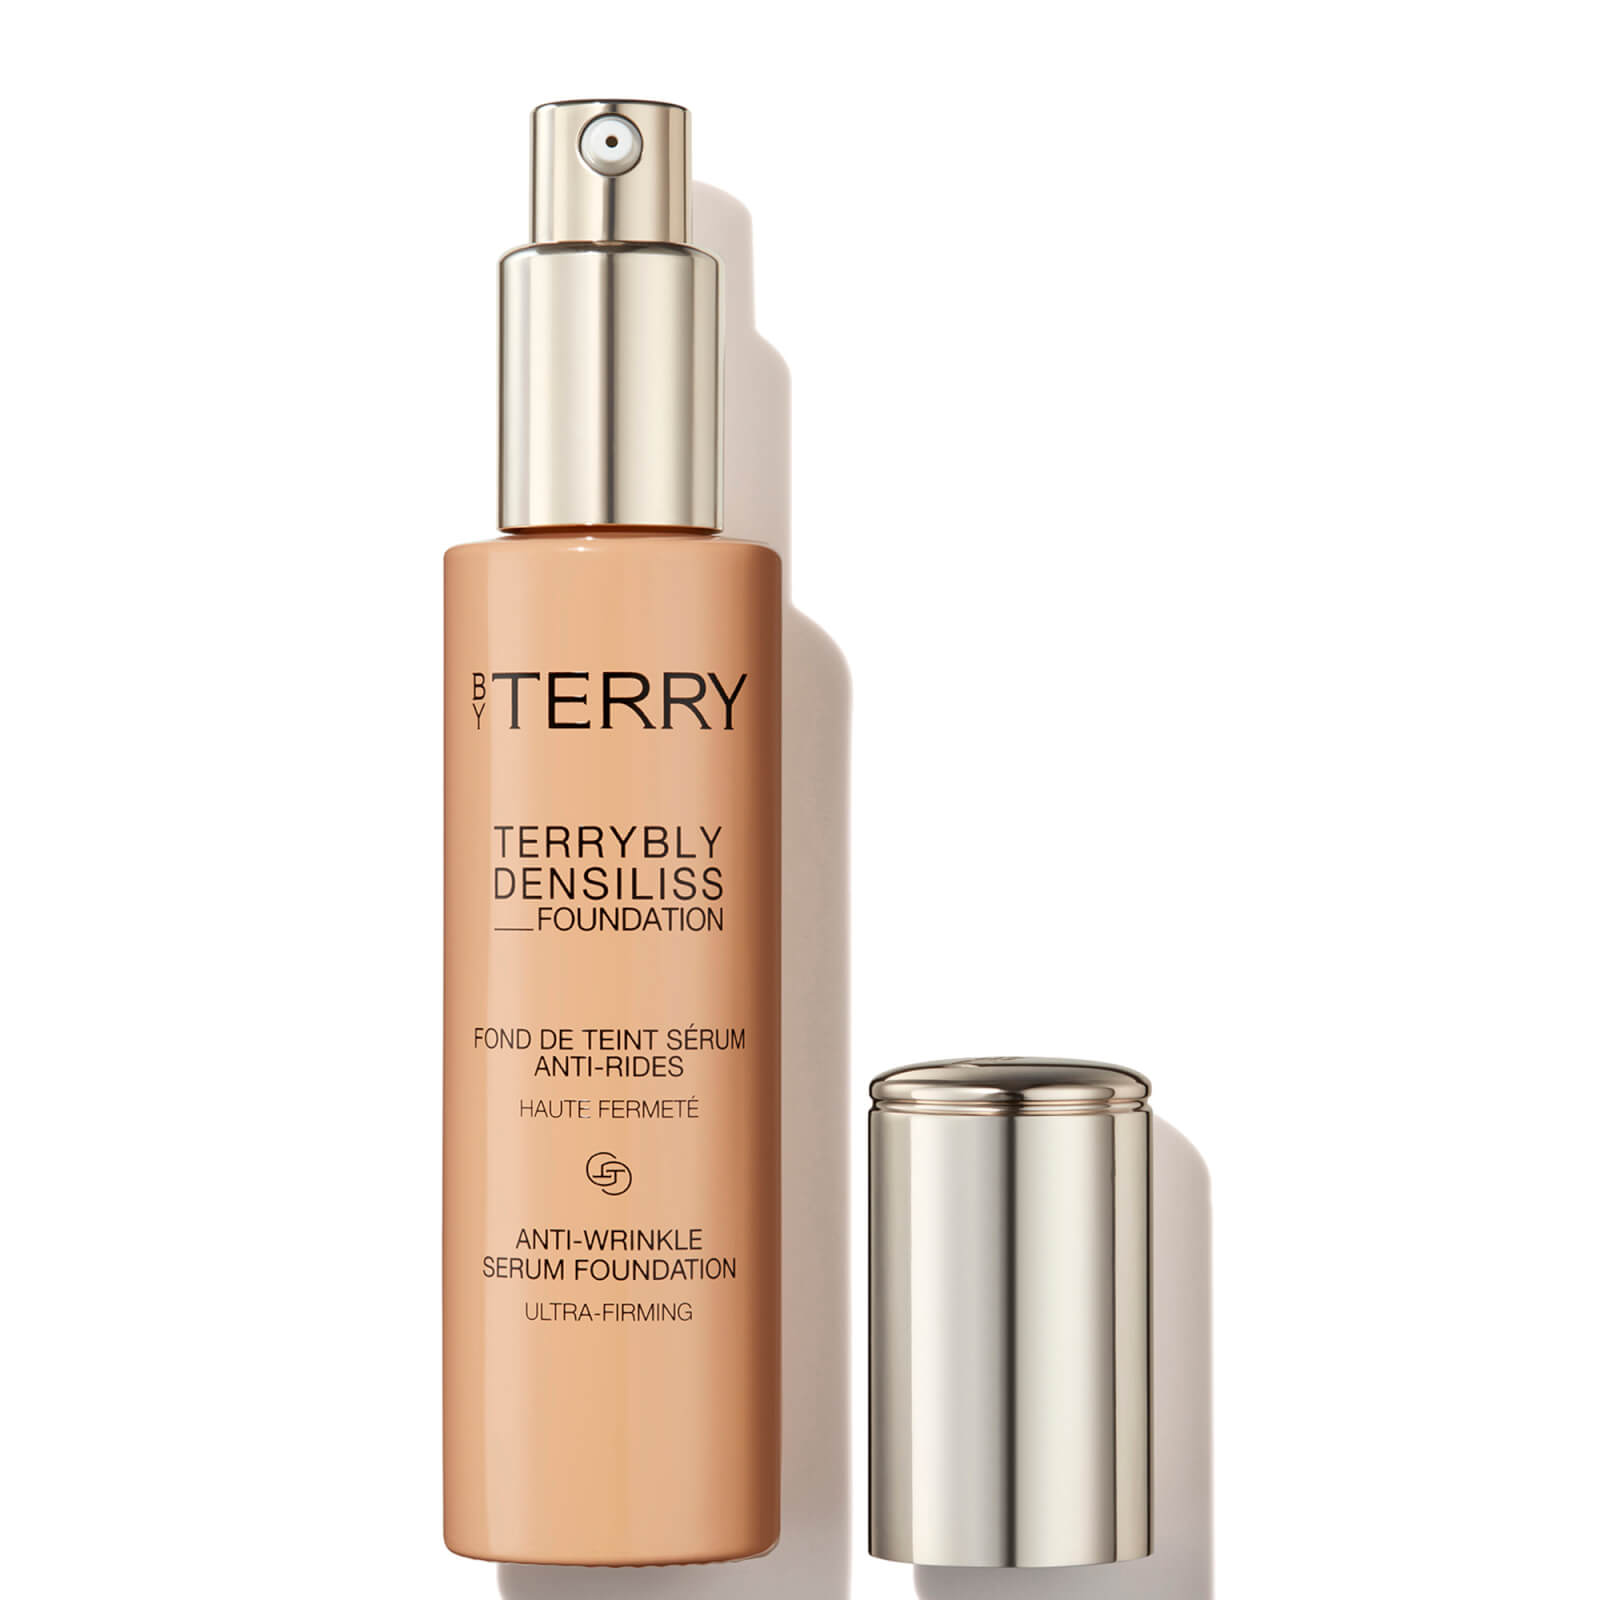 Photos - Foundation & Concealer By Terry Terrybly Densiliss Foundation 30ml  - 3. Vanilla (Various Shades)